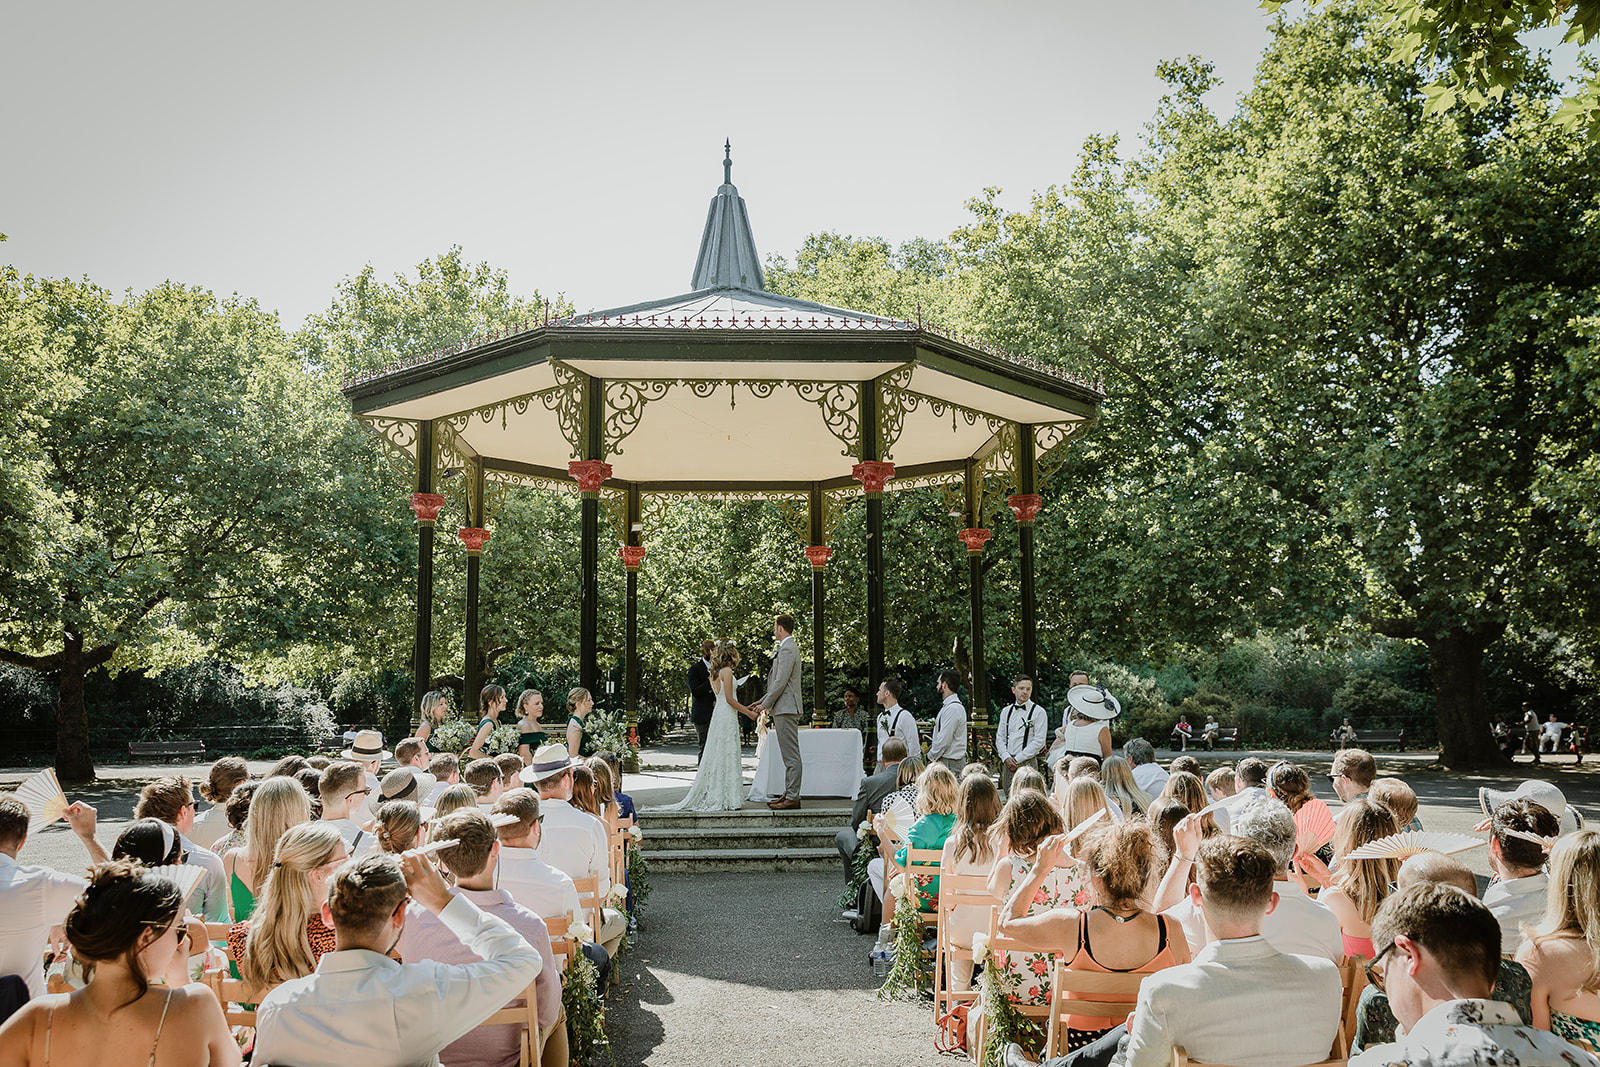 Bride and groom exchange vows in the historical band stand in Battersea Park